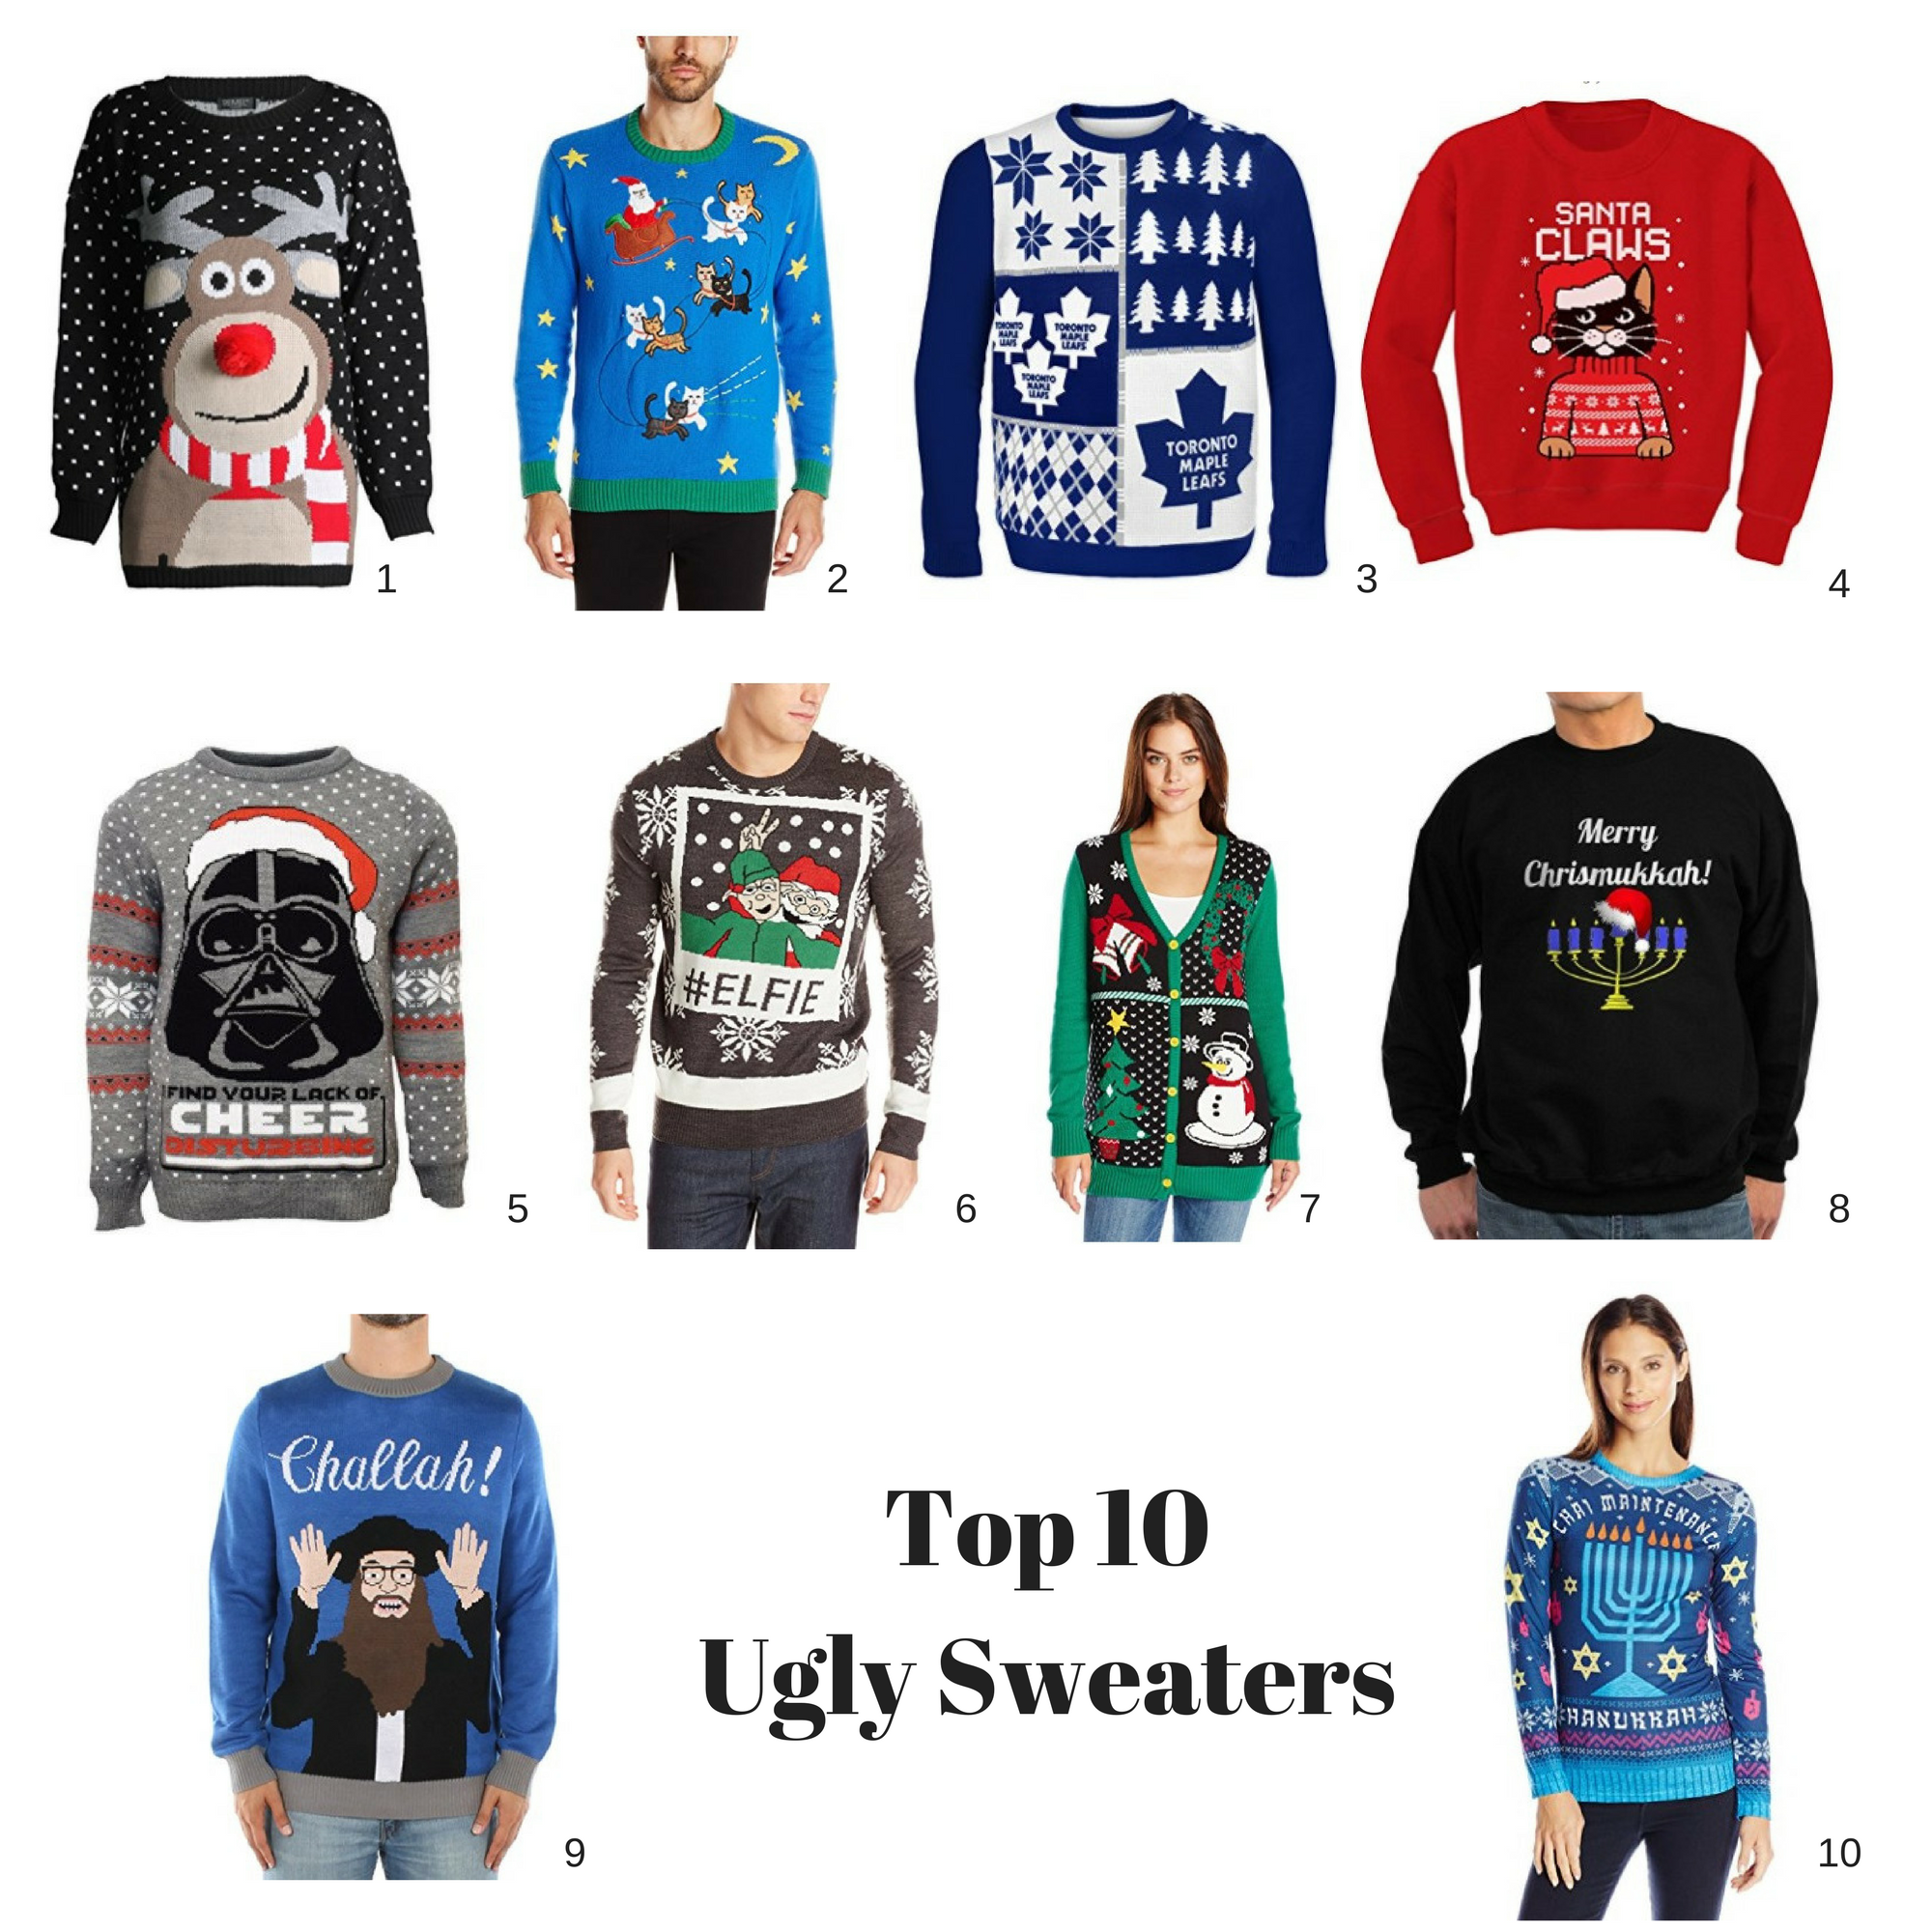 The best of this season's ugly sweaters! Mayahood